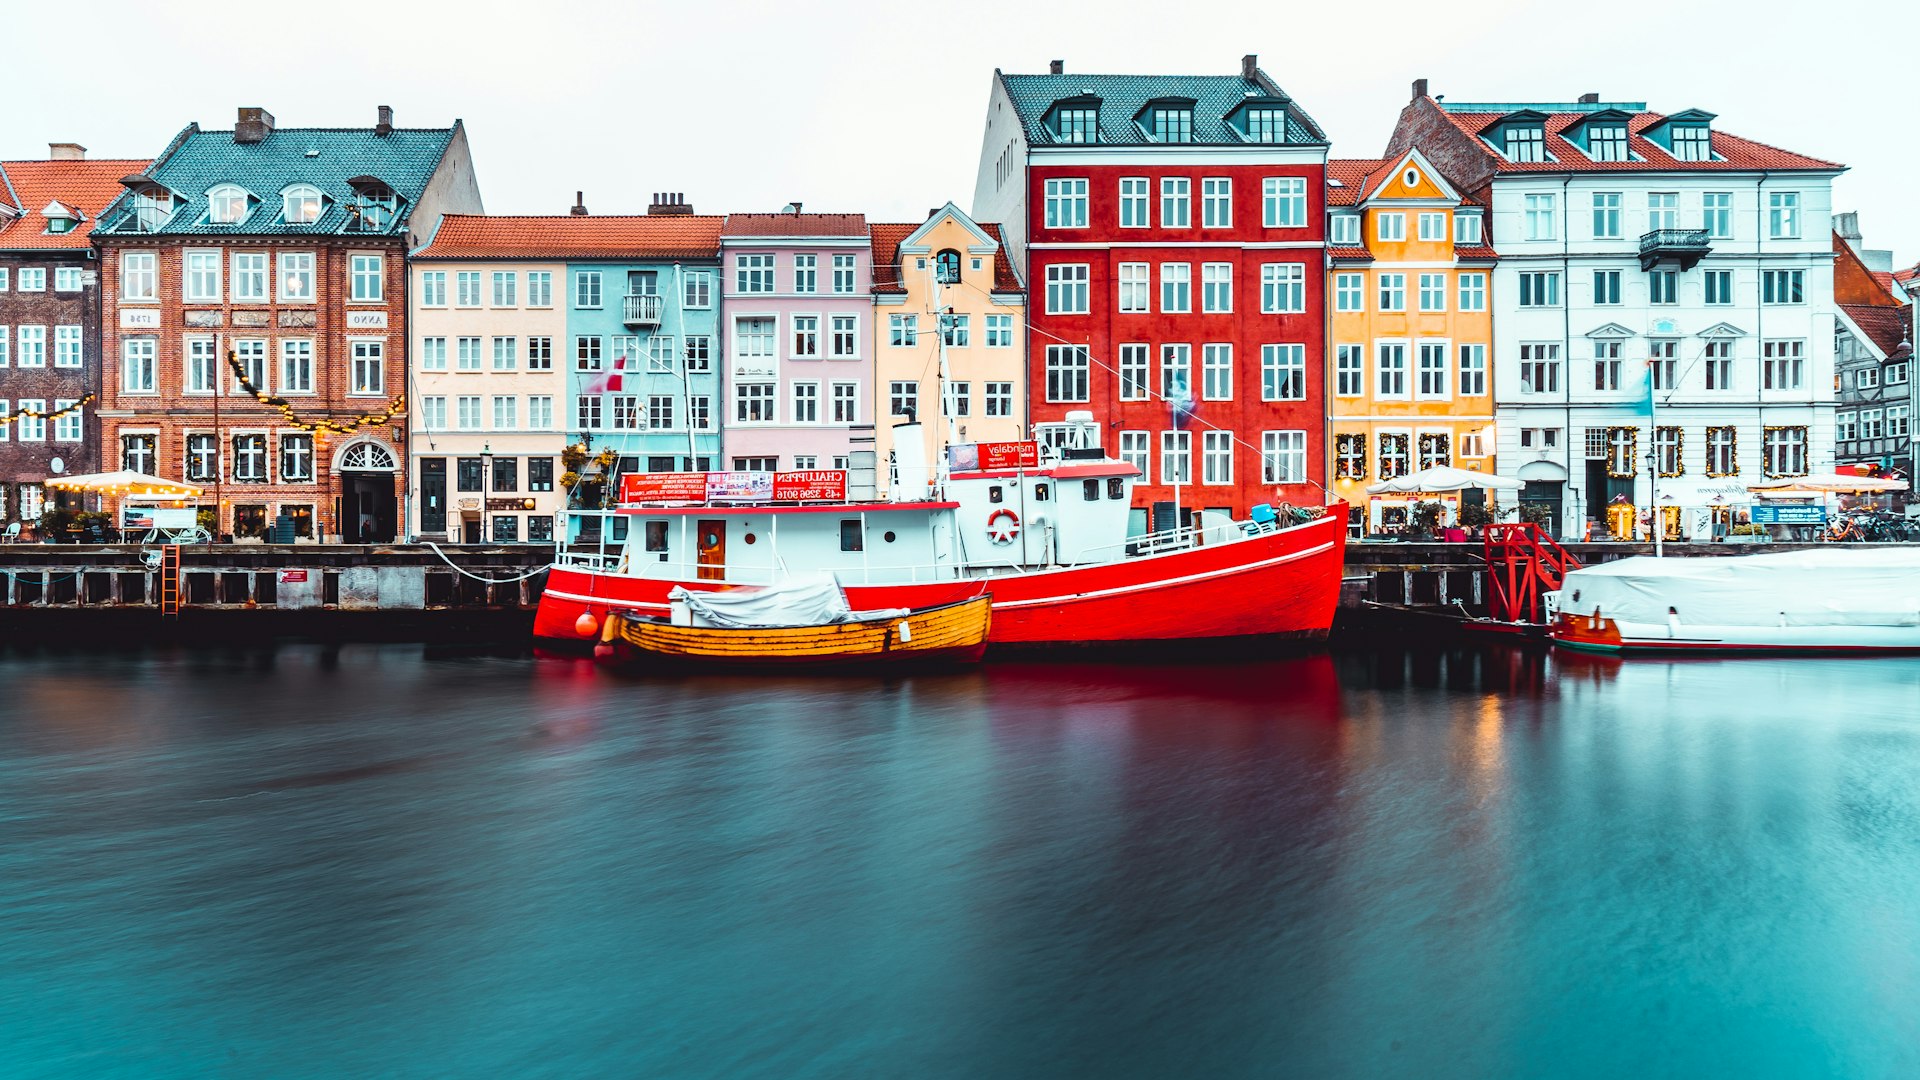 Developers Guide to Moving to Denmark